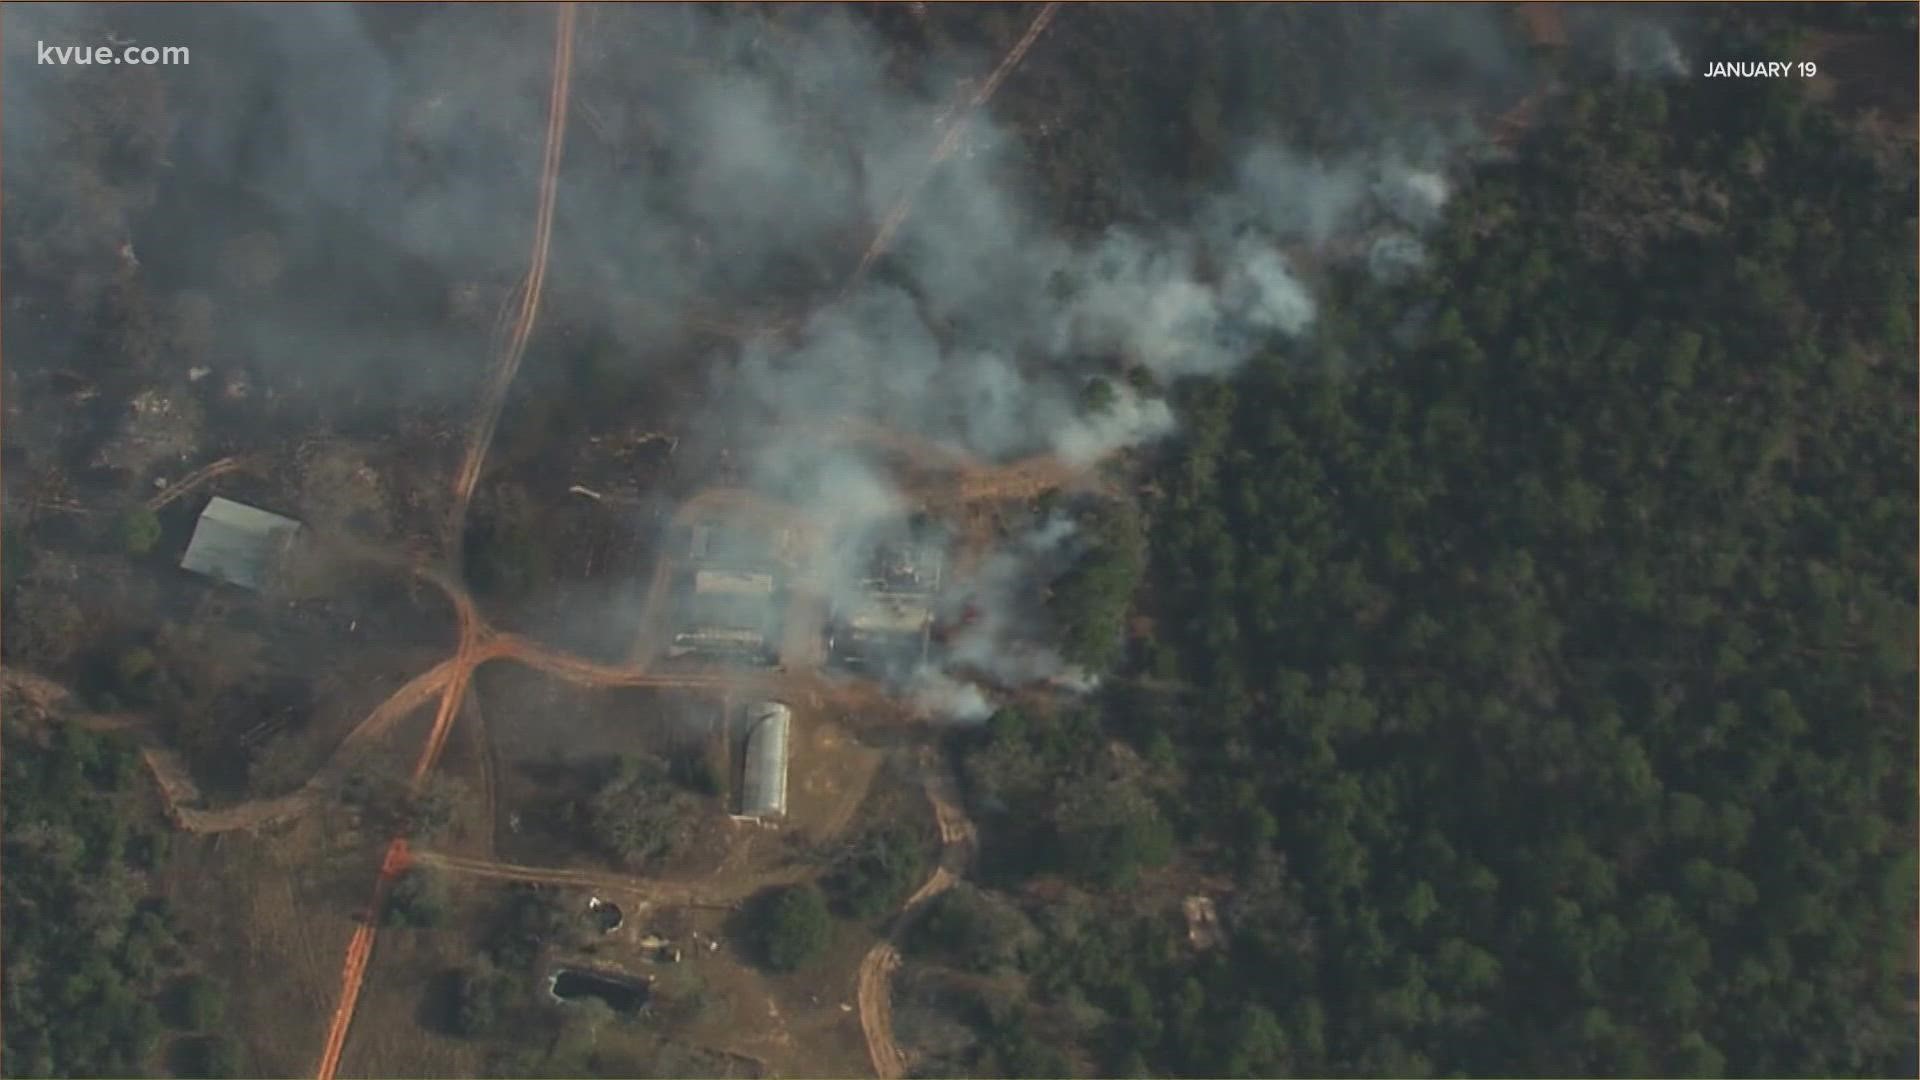 The Rolling Pines fire in Bastrop County is now 100% contained one week after it started.